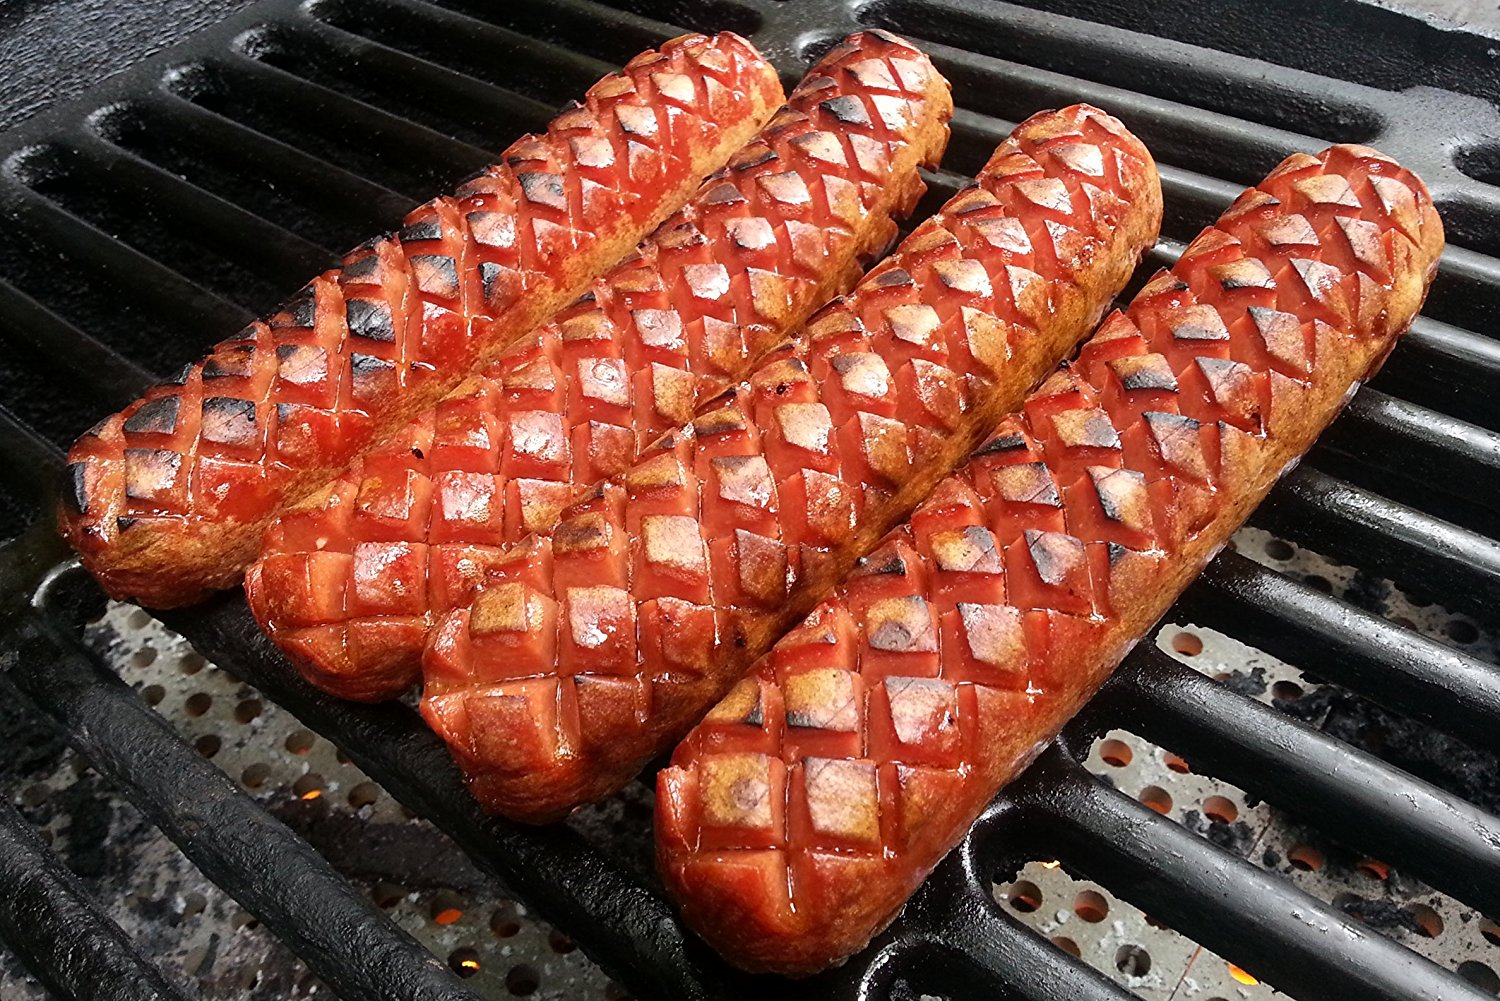 Can't get enough of those grill marks on your hotdogs and sausages?  Now you can look like the ultimate grilling master with this nifty gadget.  Get it <a href="https://amzn.to/2klK8IM" target="_blank"><font color="red"><b>HERE</font></b></a>